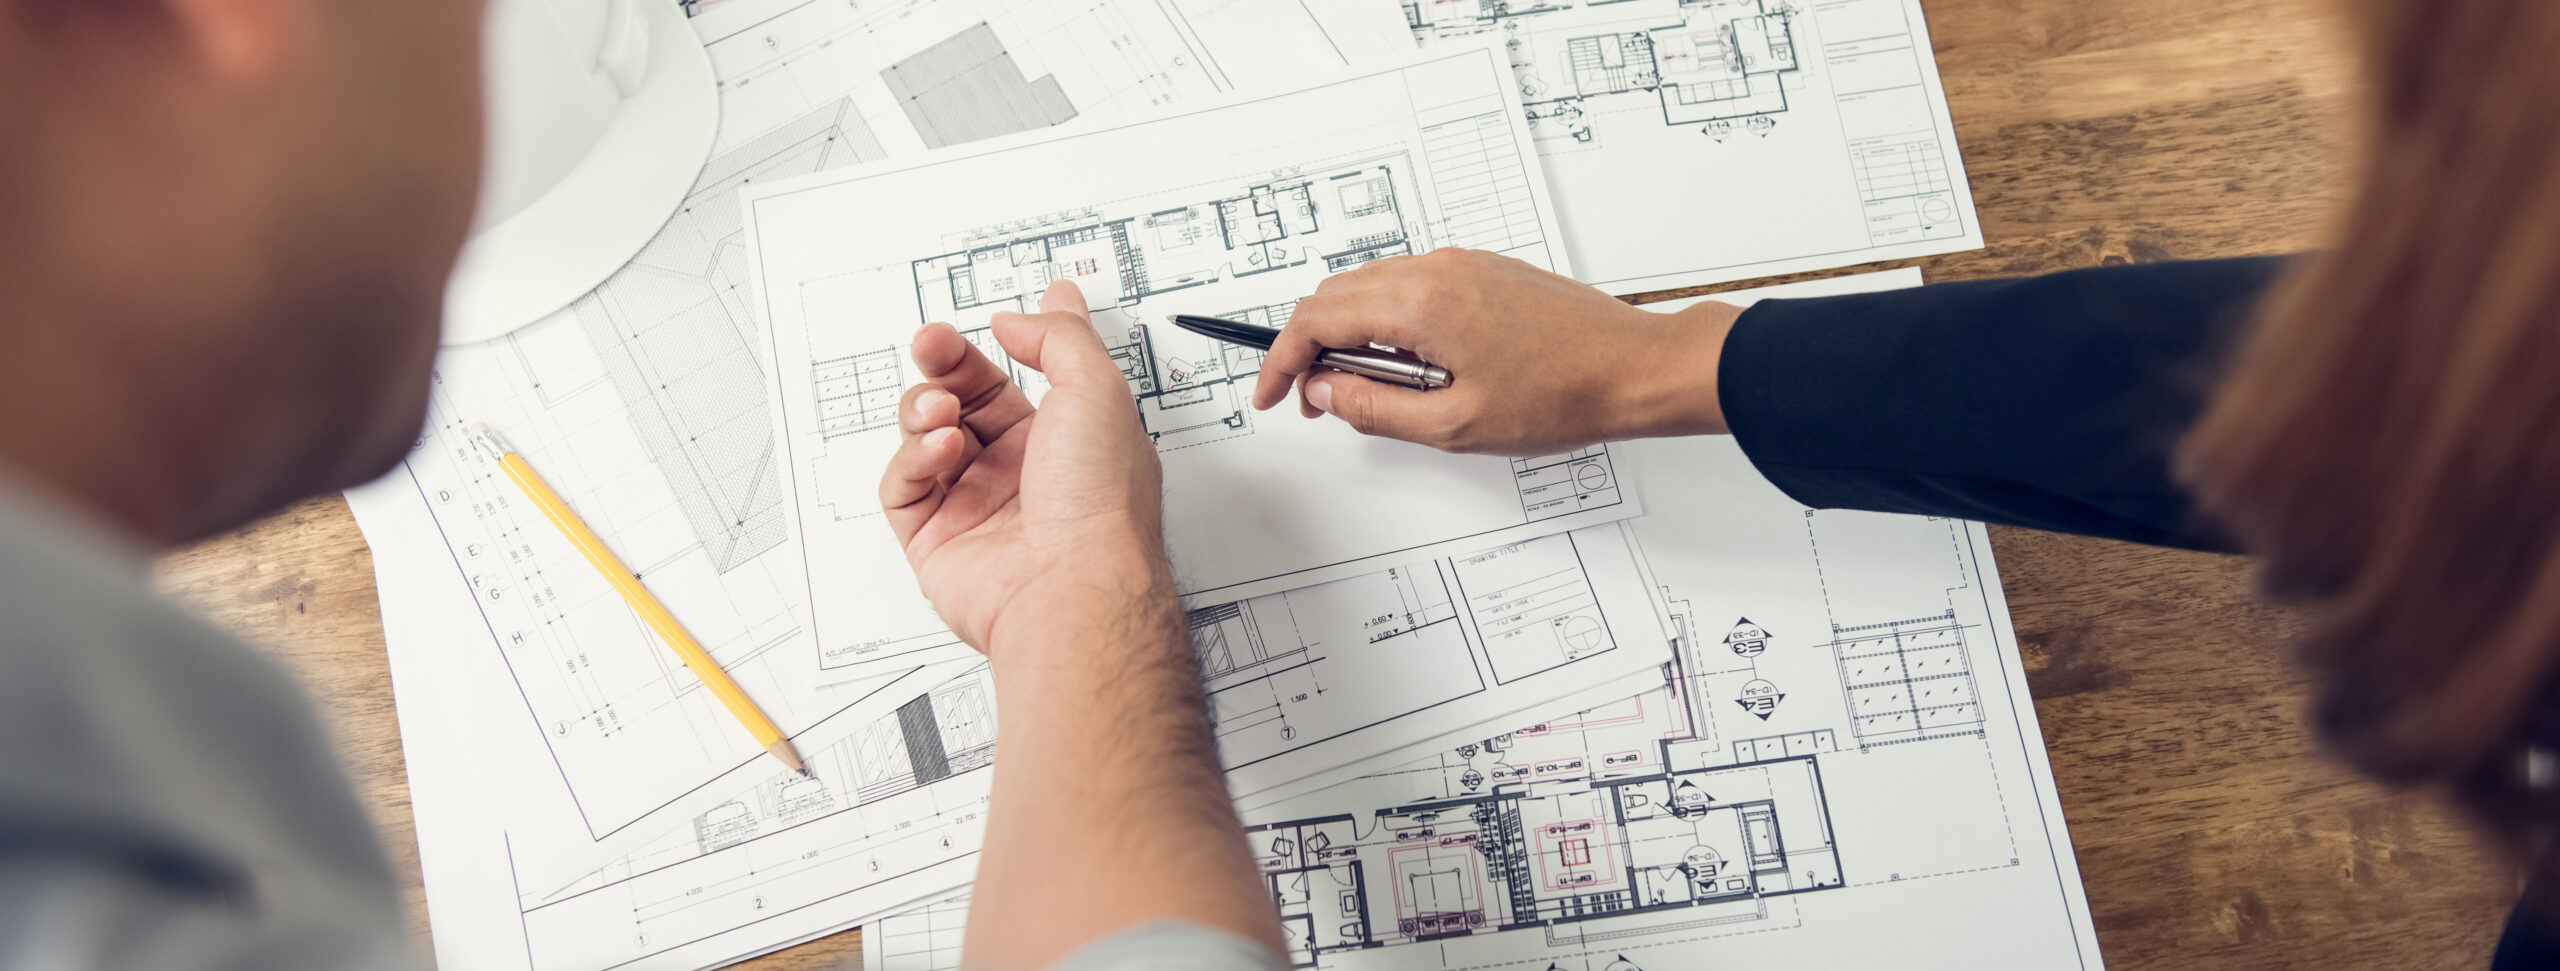 Why Choose Planning By Design For Your Architectural Design and Planning Permission?